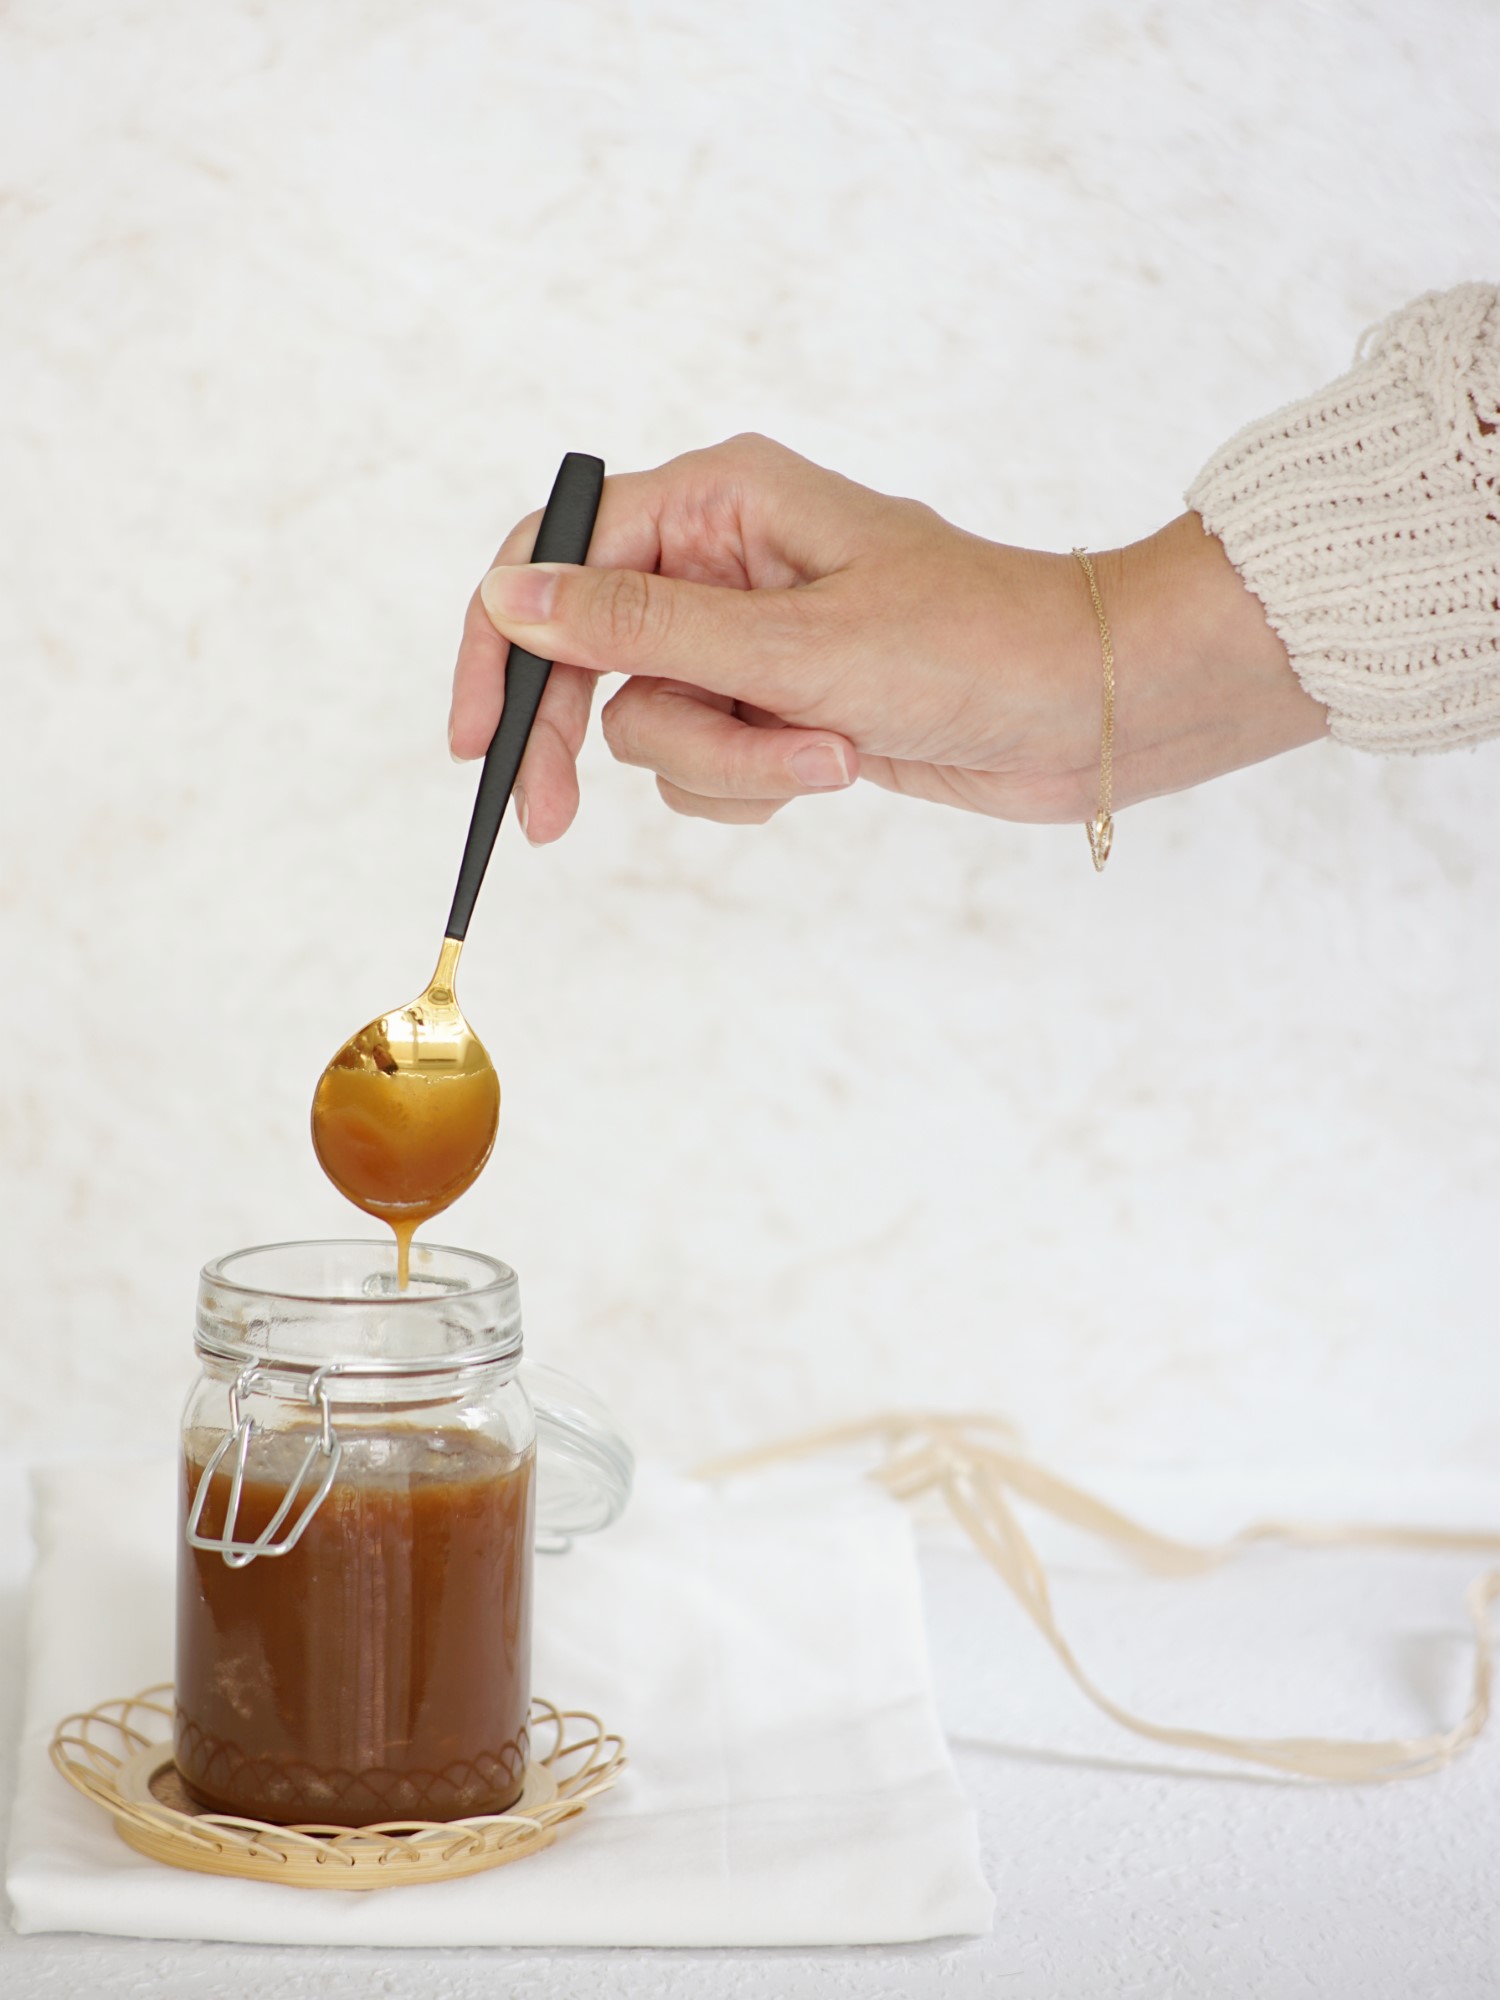 Homemade caramel - Title of the Recipe